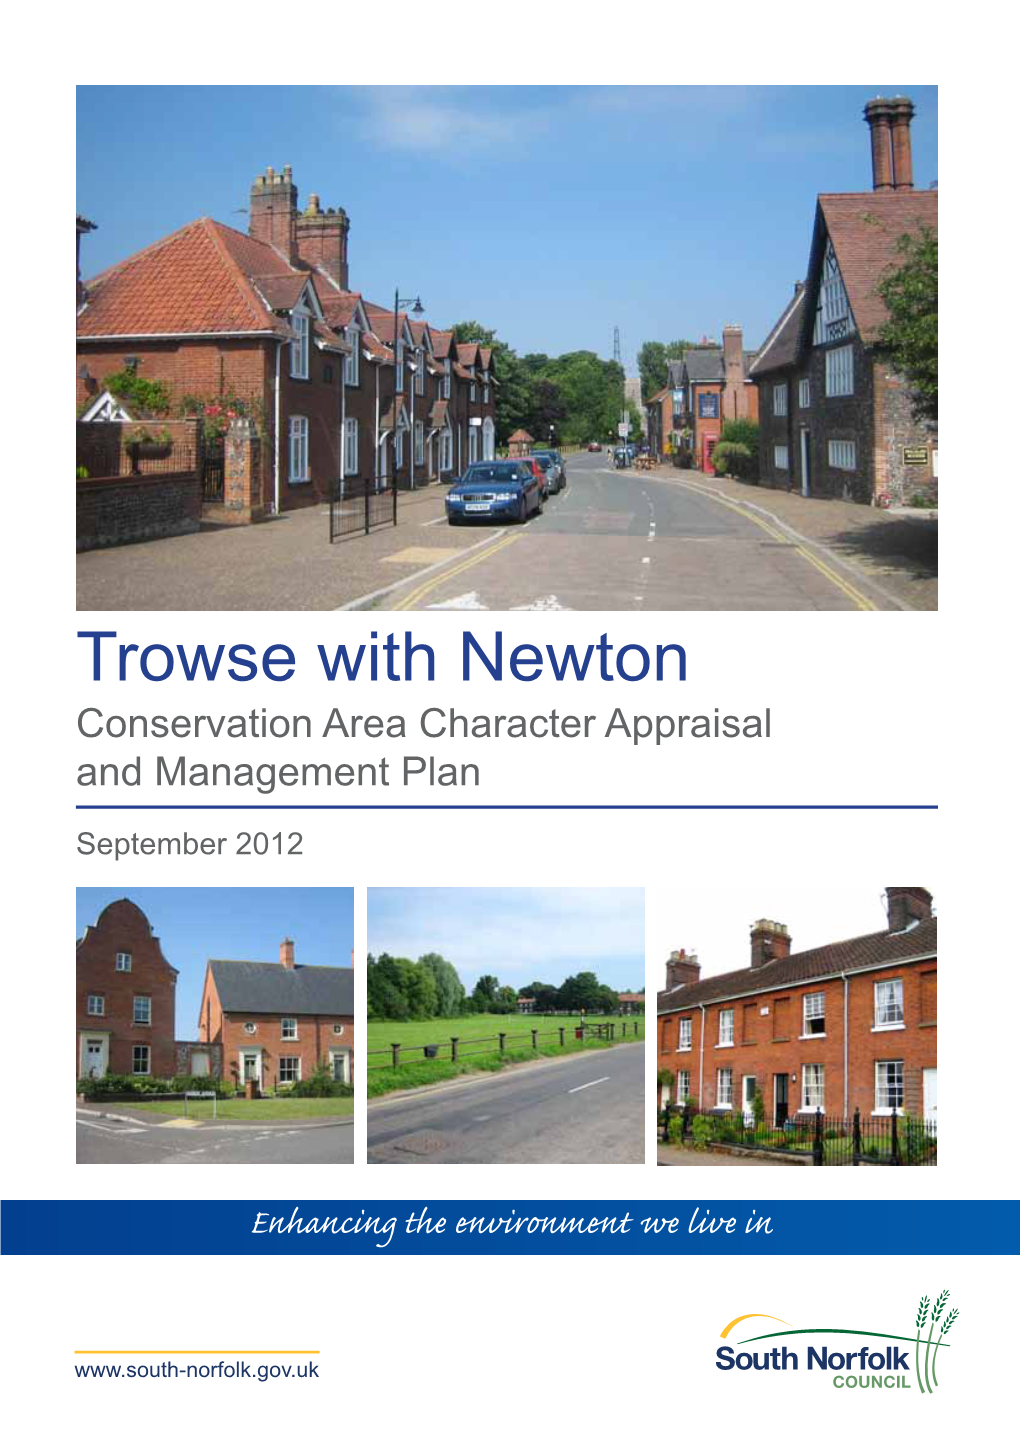 Trowse with Newton Conservation Area Character Appraisal and Management Plan